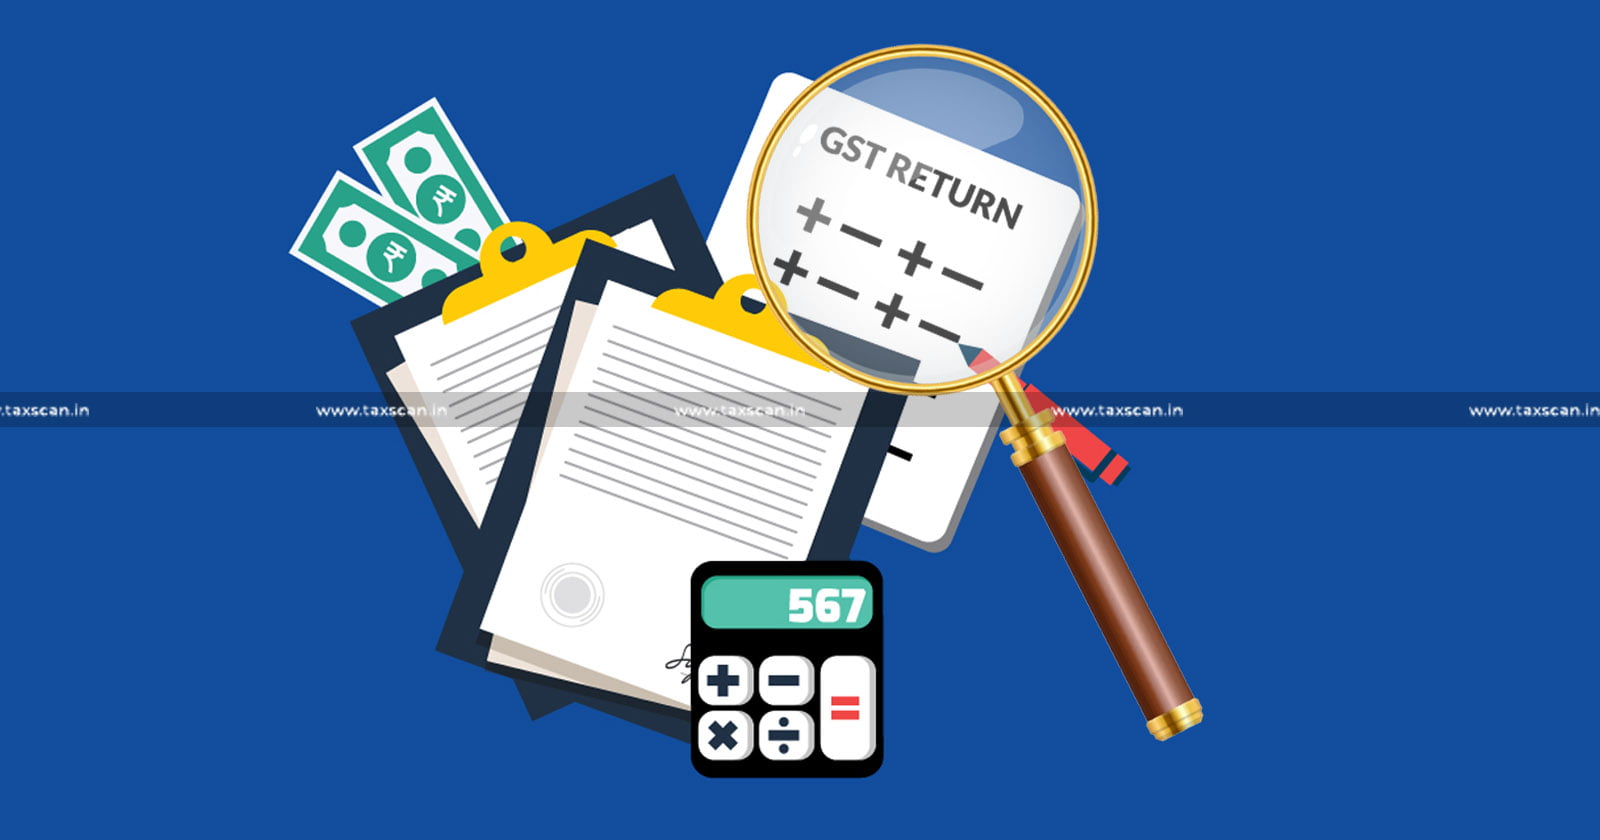 GST Dept - Time Bar on Scrutiny of GST Annual Returns - Time Bar - GST Annual Returns - Taxpayers in Delhi - Taxpayers - Scrutiny of GST Annual Returns - taxscan